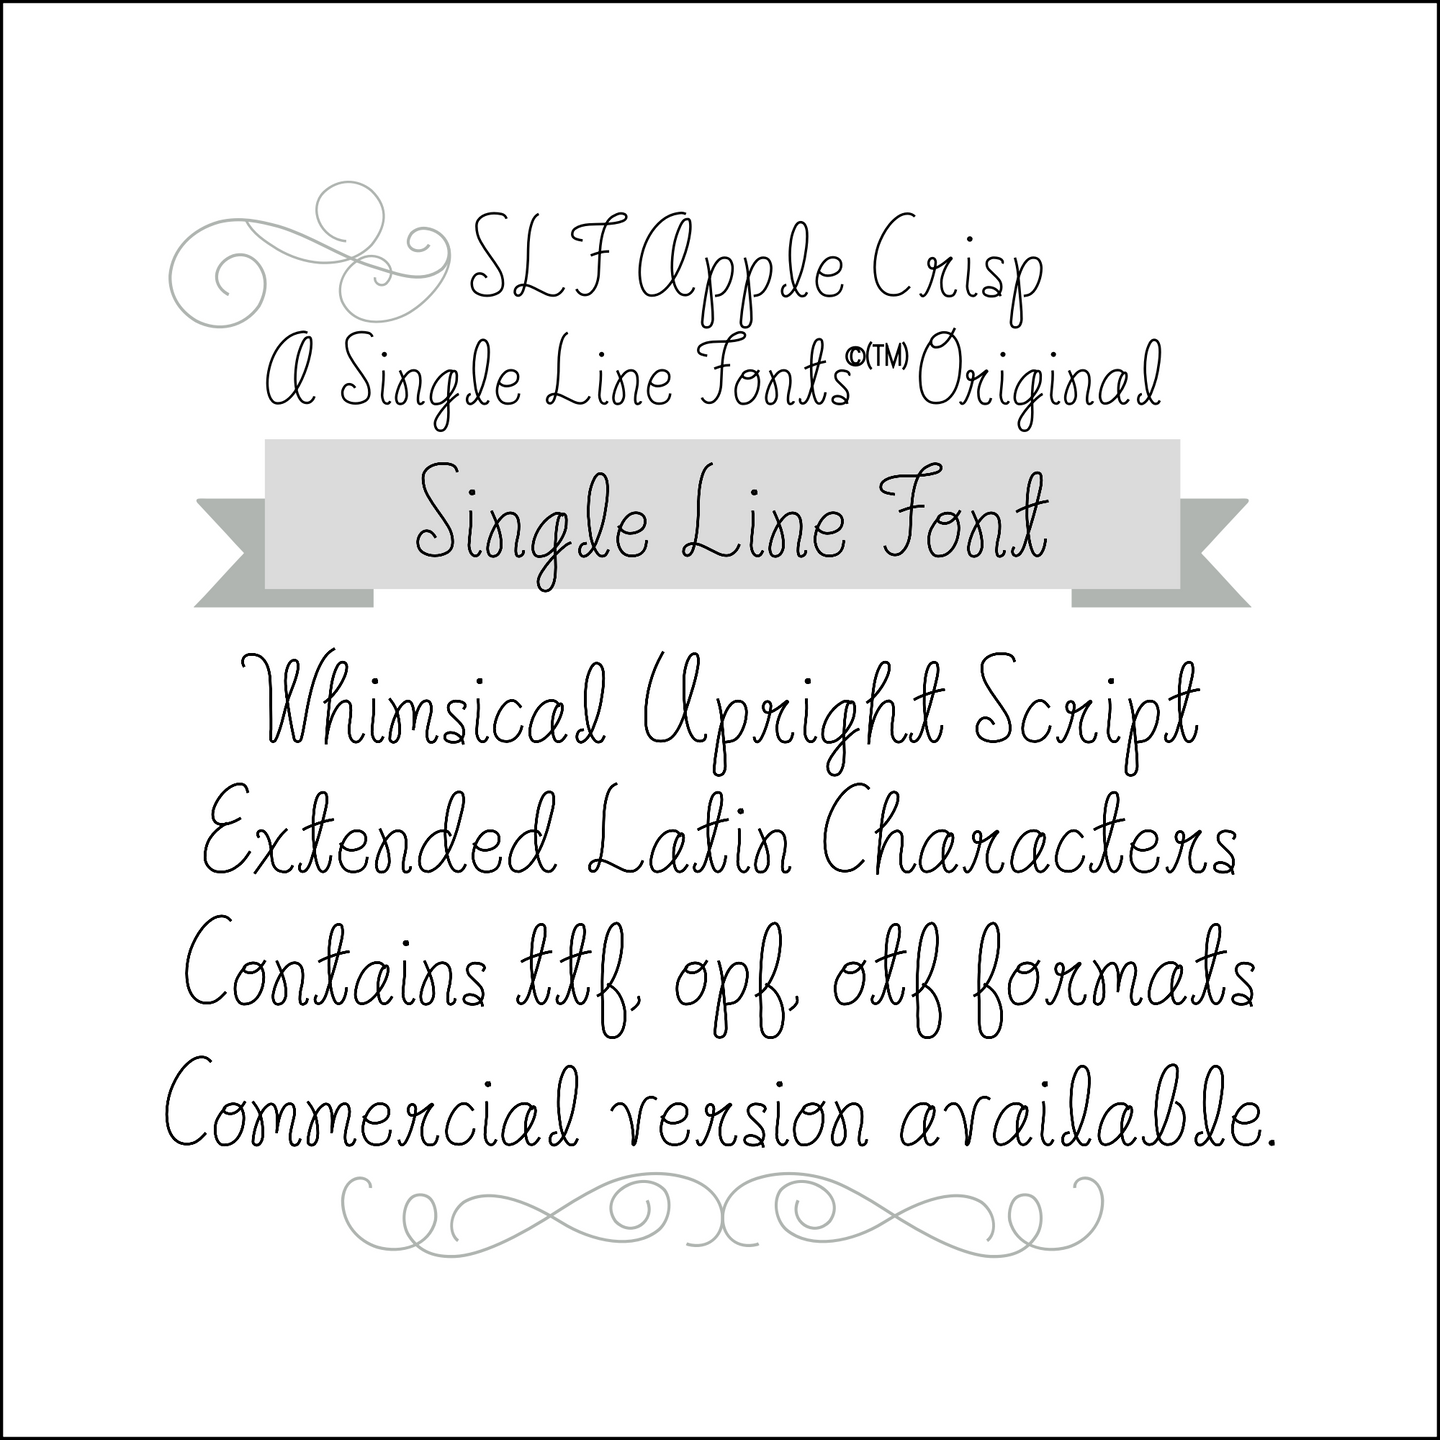 single line font slf apple crisp example. upright script font with extended latin characters in ttf, otf, opf formats.